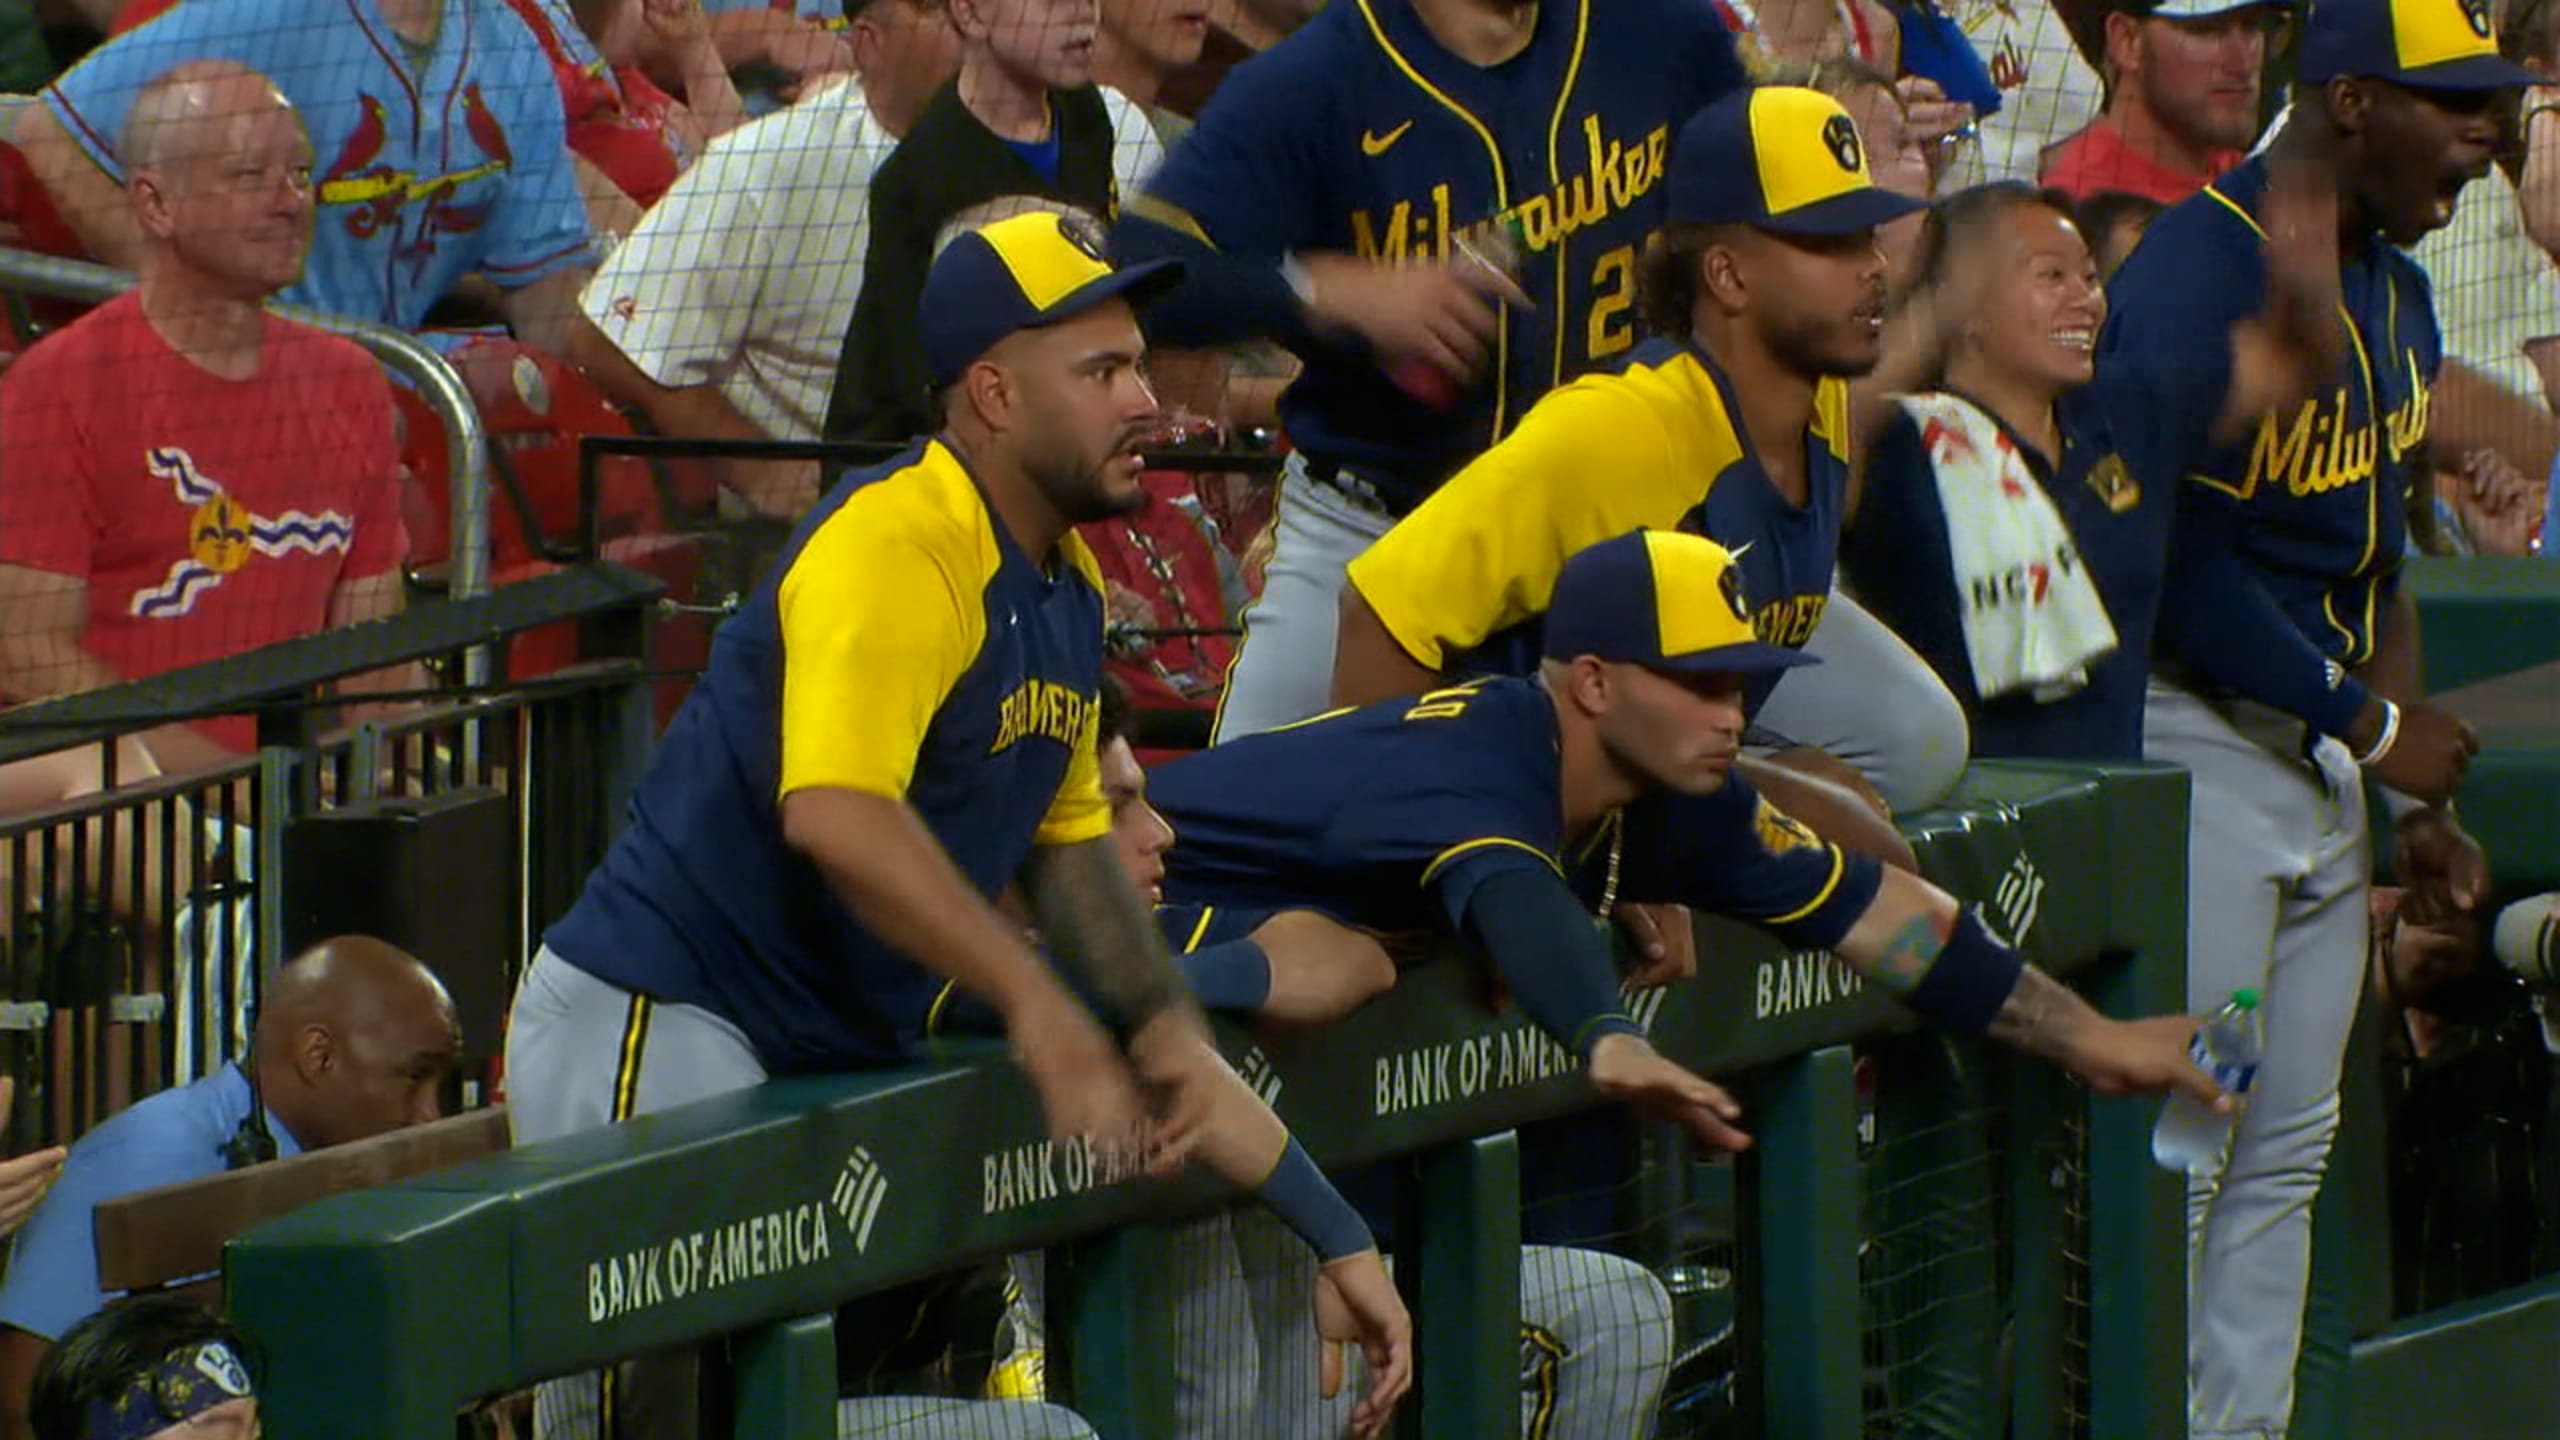 Brewers win sixth straight, down struggling Cardinals, 4-0 - Brew Crew Ball